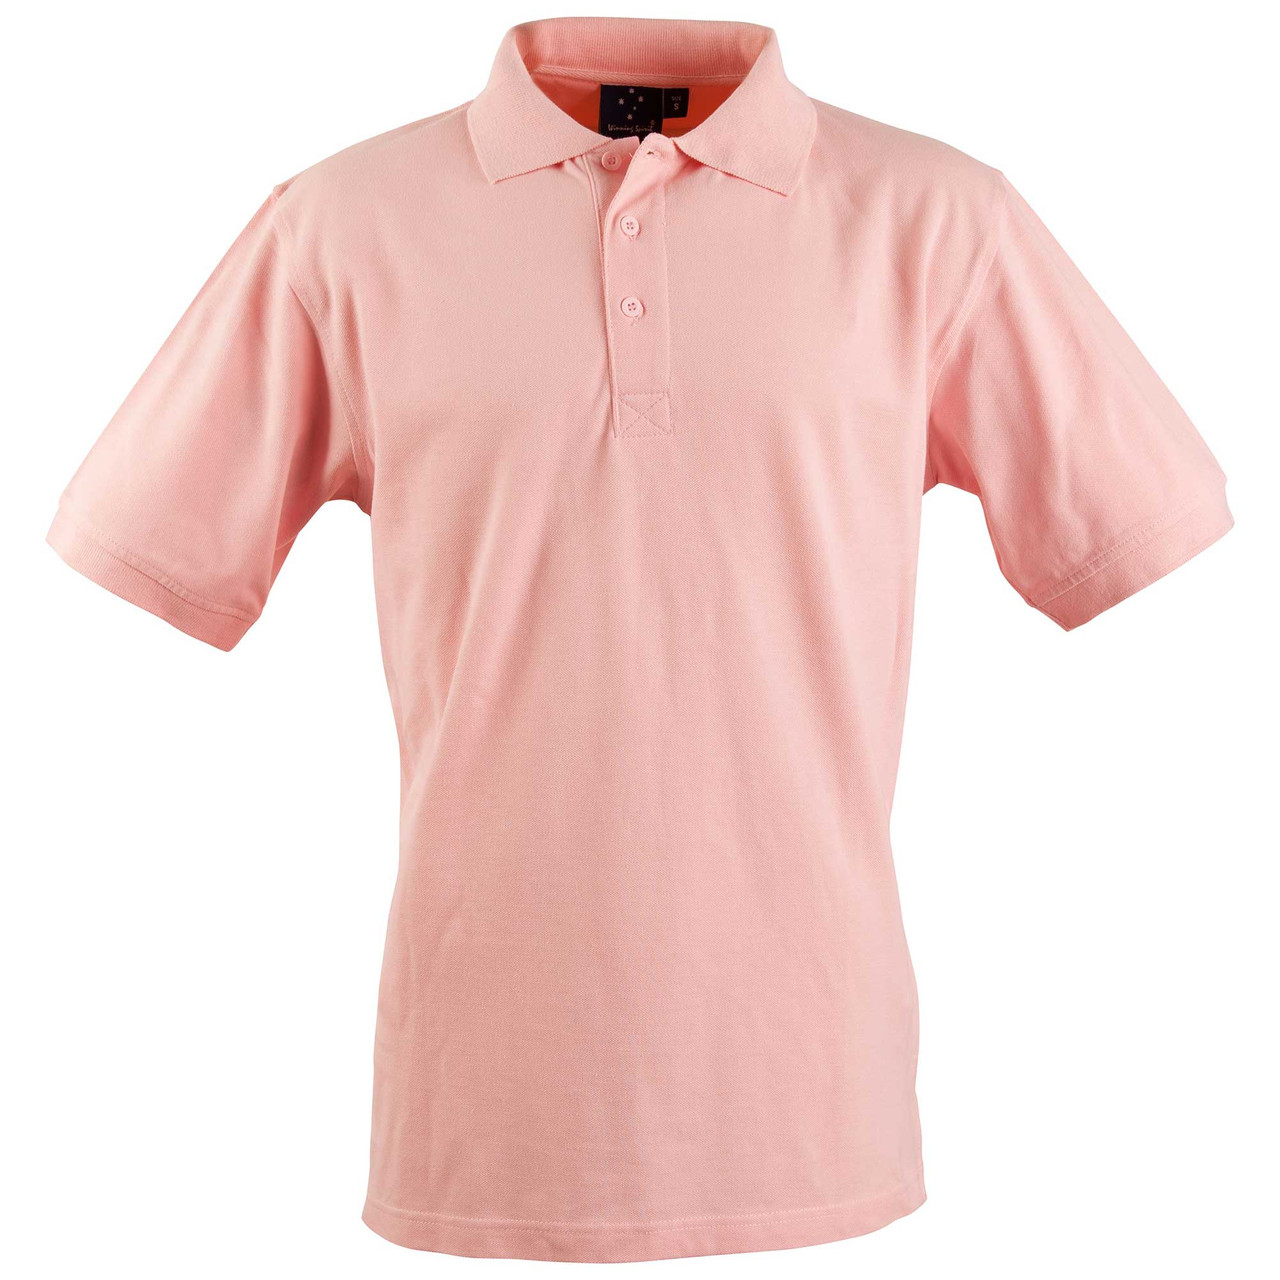 Shop for Mens 100% Cotton Knit Short Sleeve Polo Shirt Online